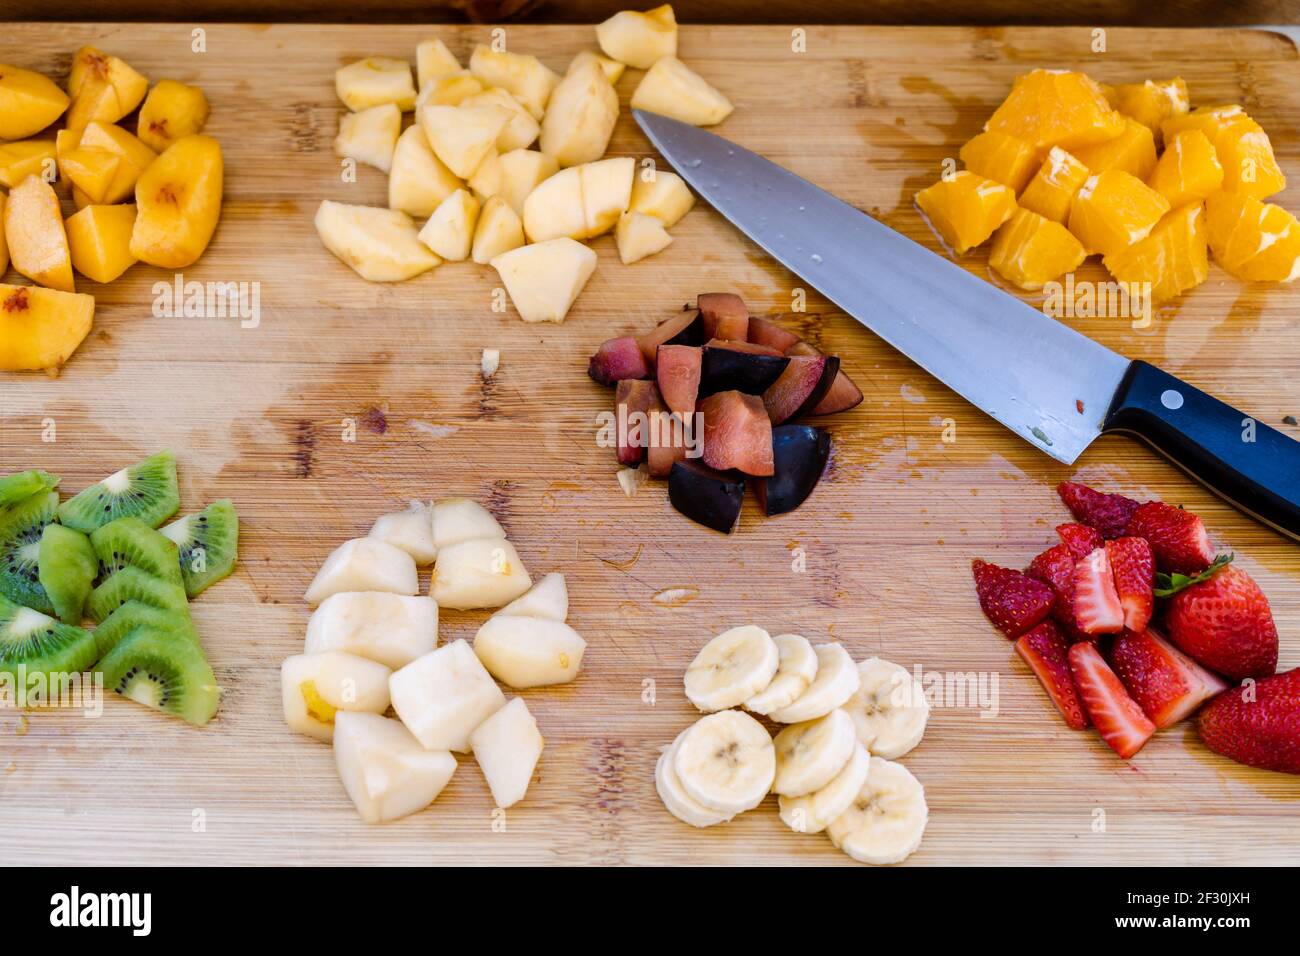 https://c8.alamy.com/comp/2F30JXH/chopped-fruits-arranged-on-cutting-board-on-white-wooden-background-top-view-ingredients-for-fruit-salad-from-above-flat-overhead-2F30JXH.jpg